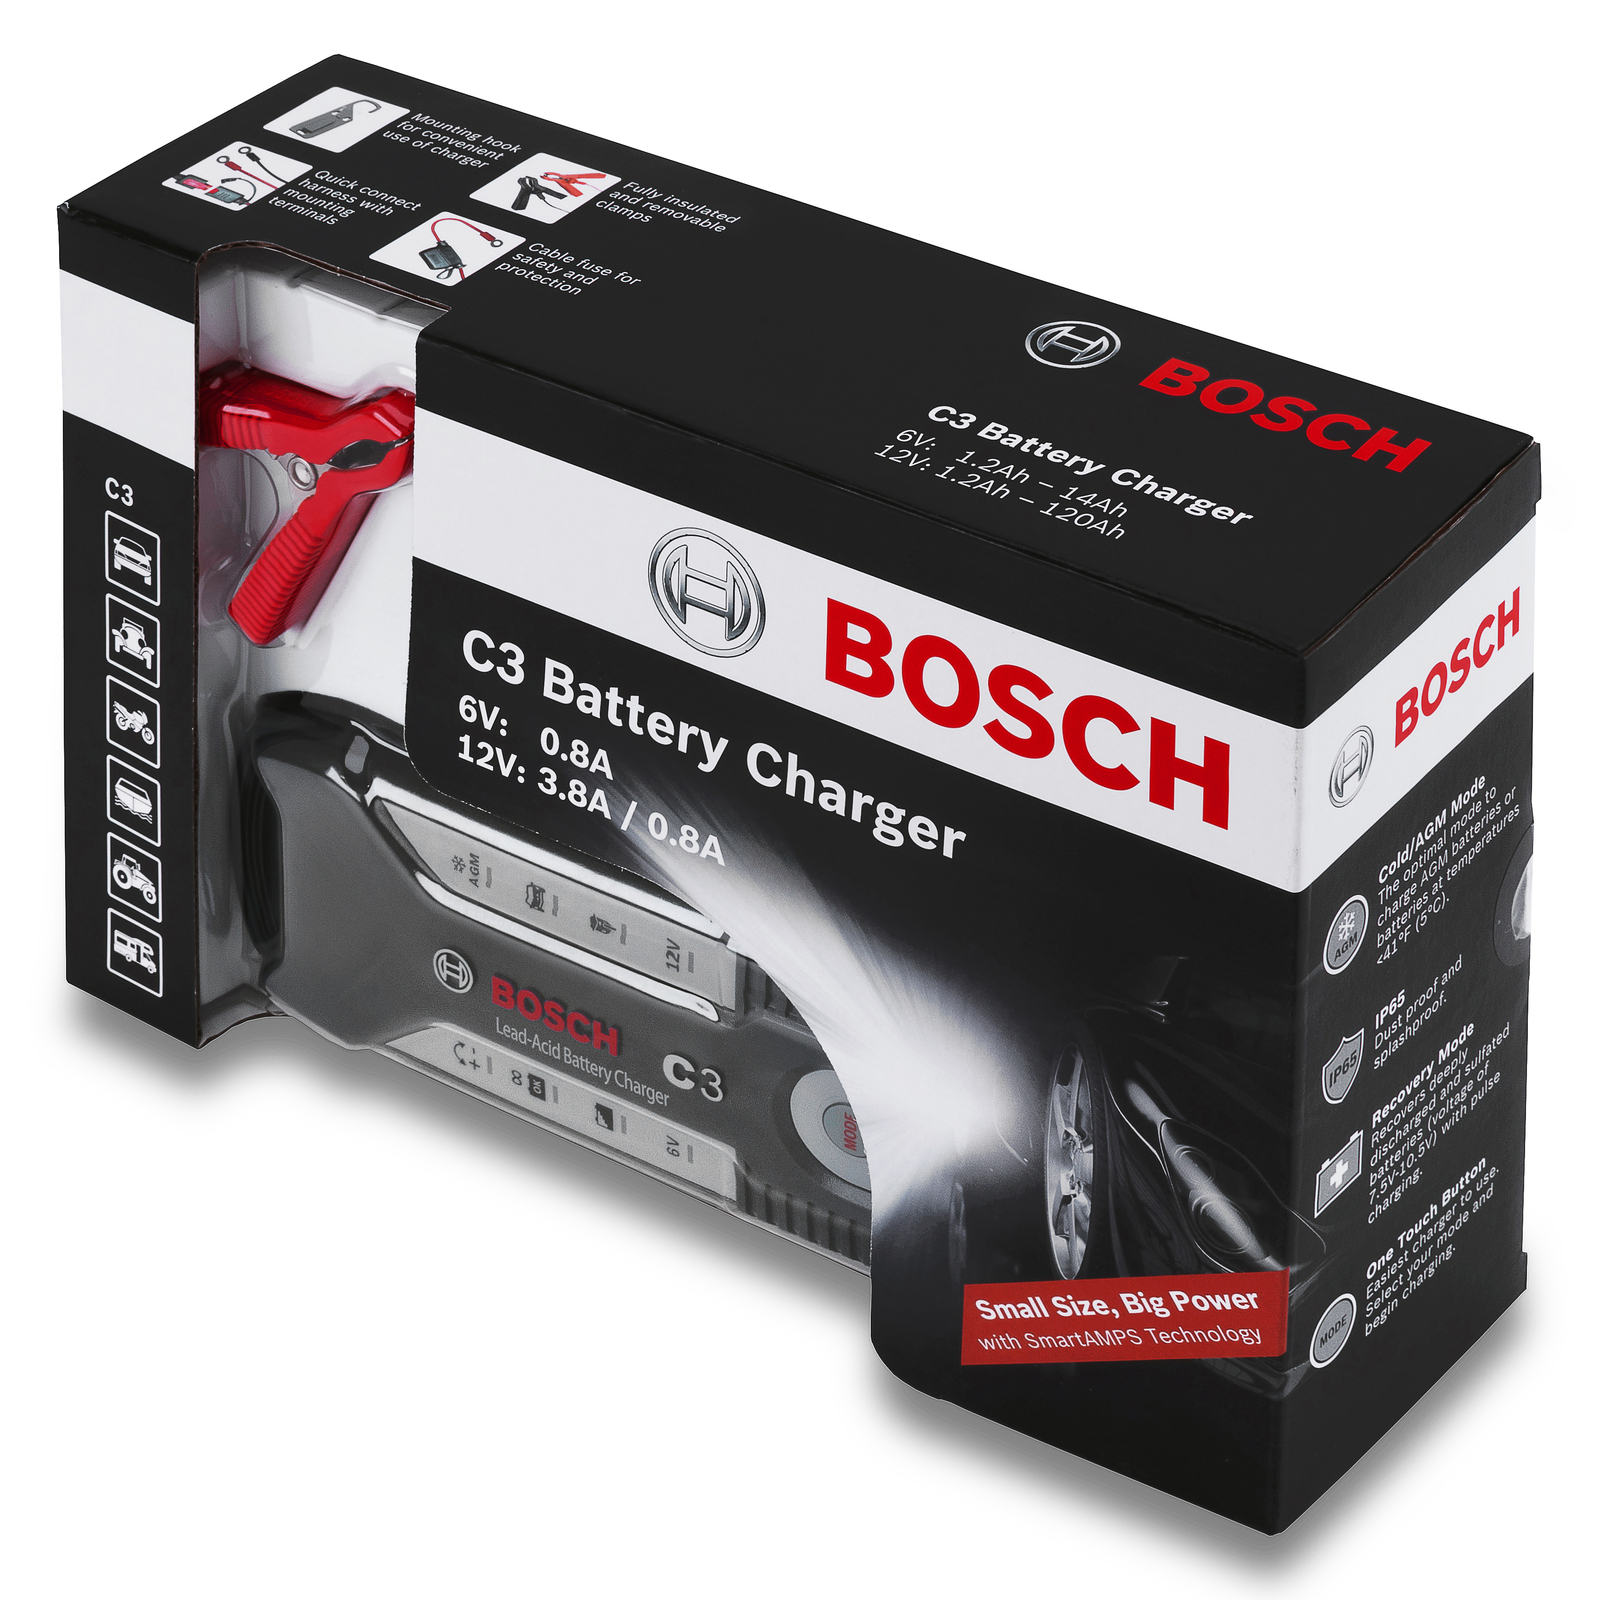 PRICE DROP-Bosch C3 Battery Charger; 6/12V; US Plug; Never Used